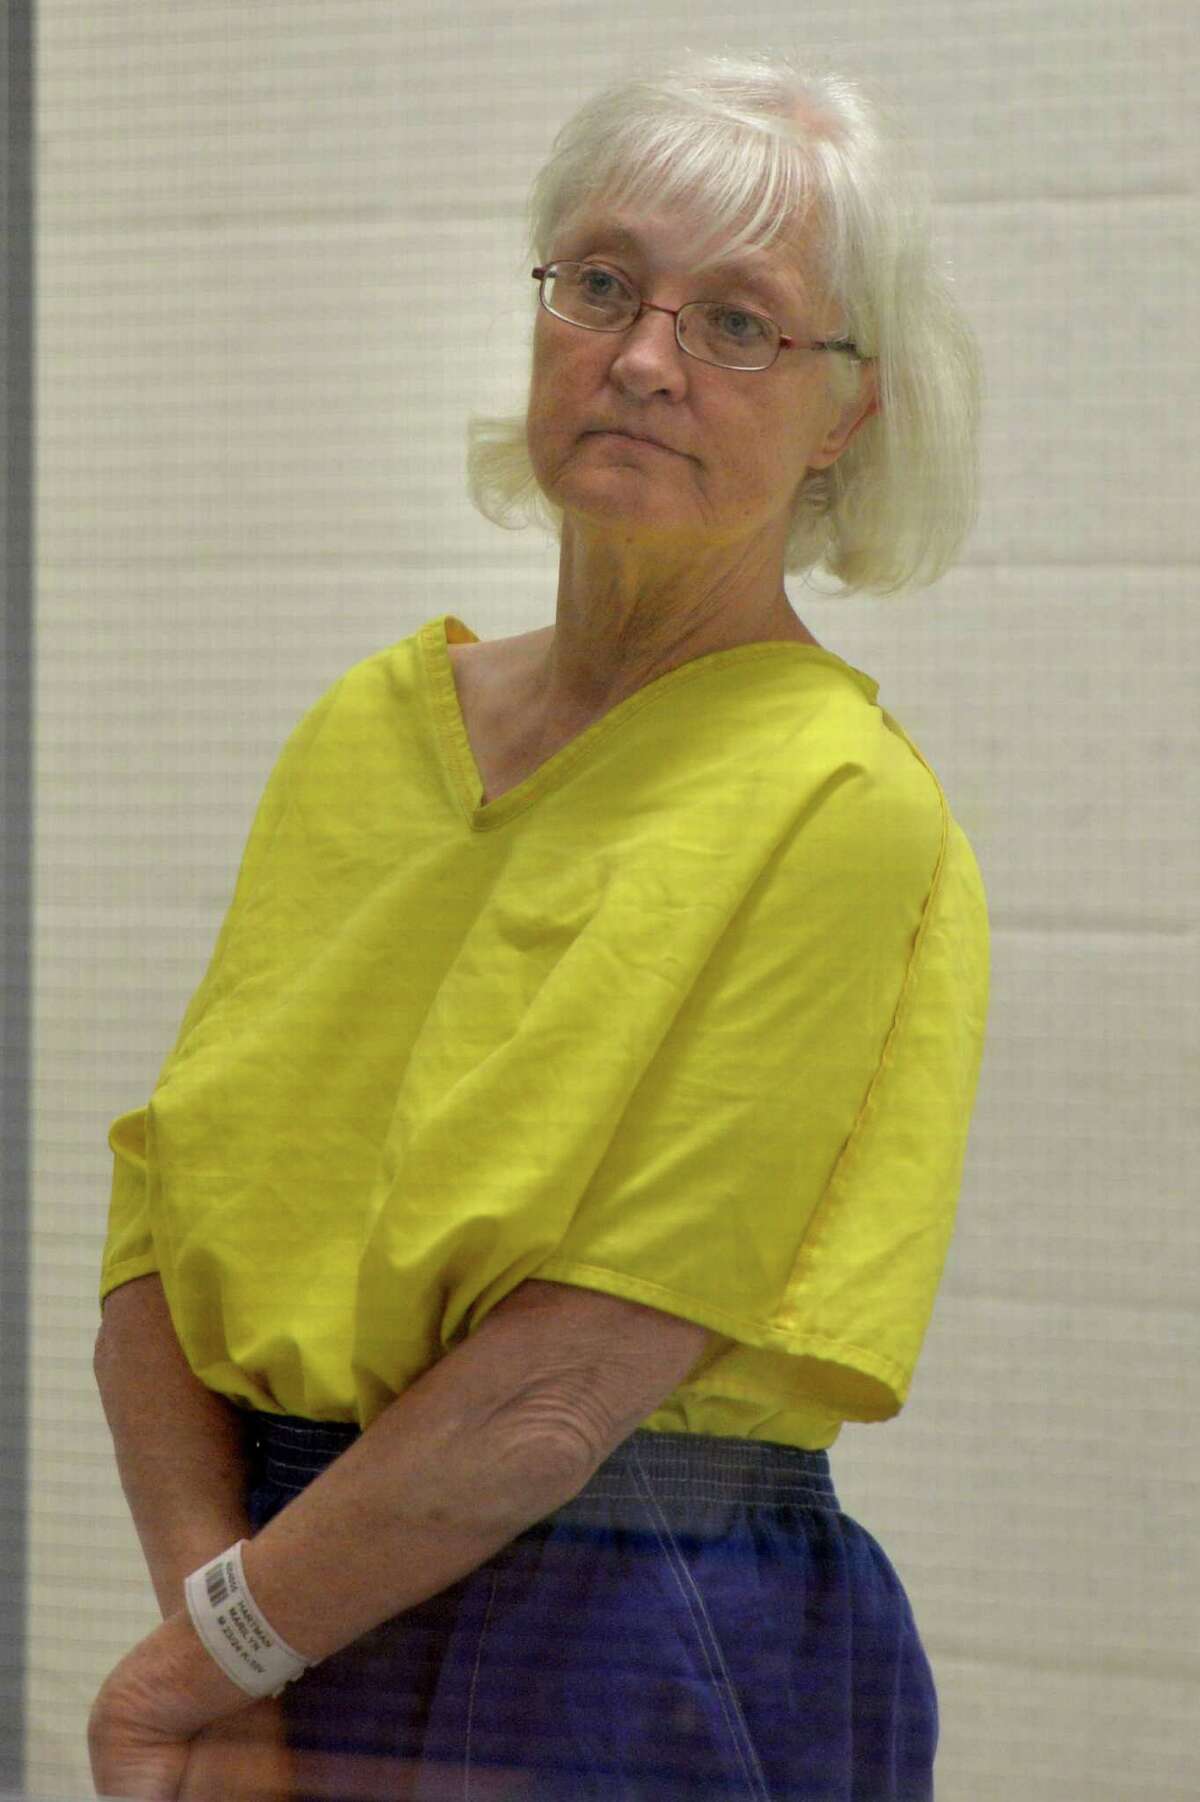 Marilyn Jean Hartman appears in court in 2014. file photo, in the airport courthouse in Los Angeles.